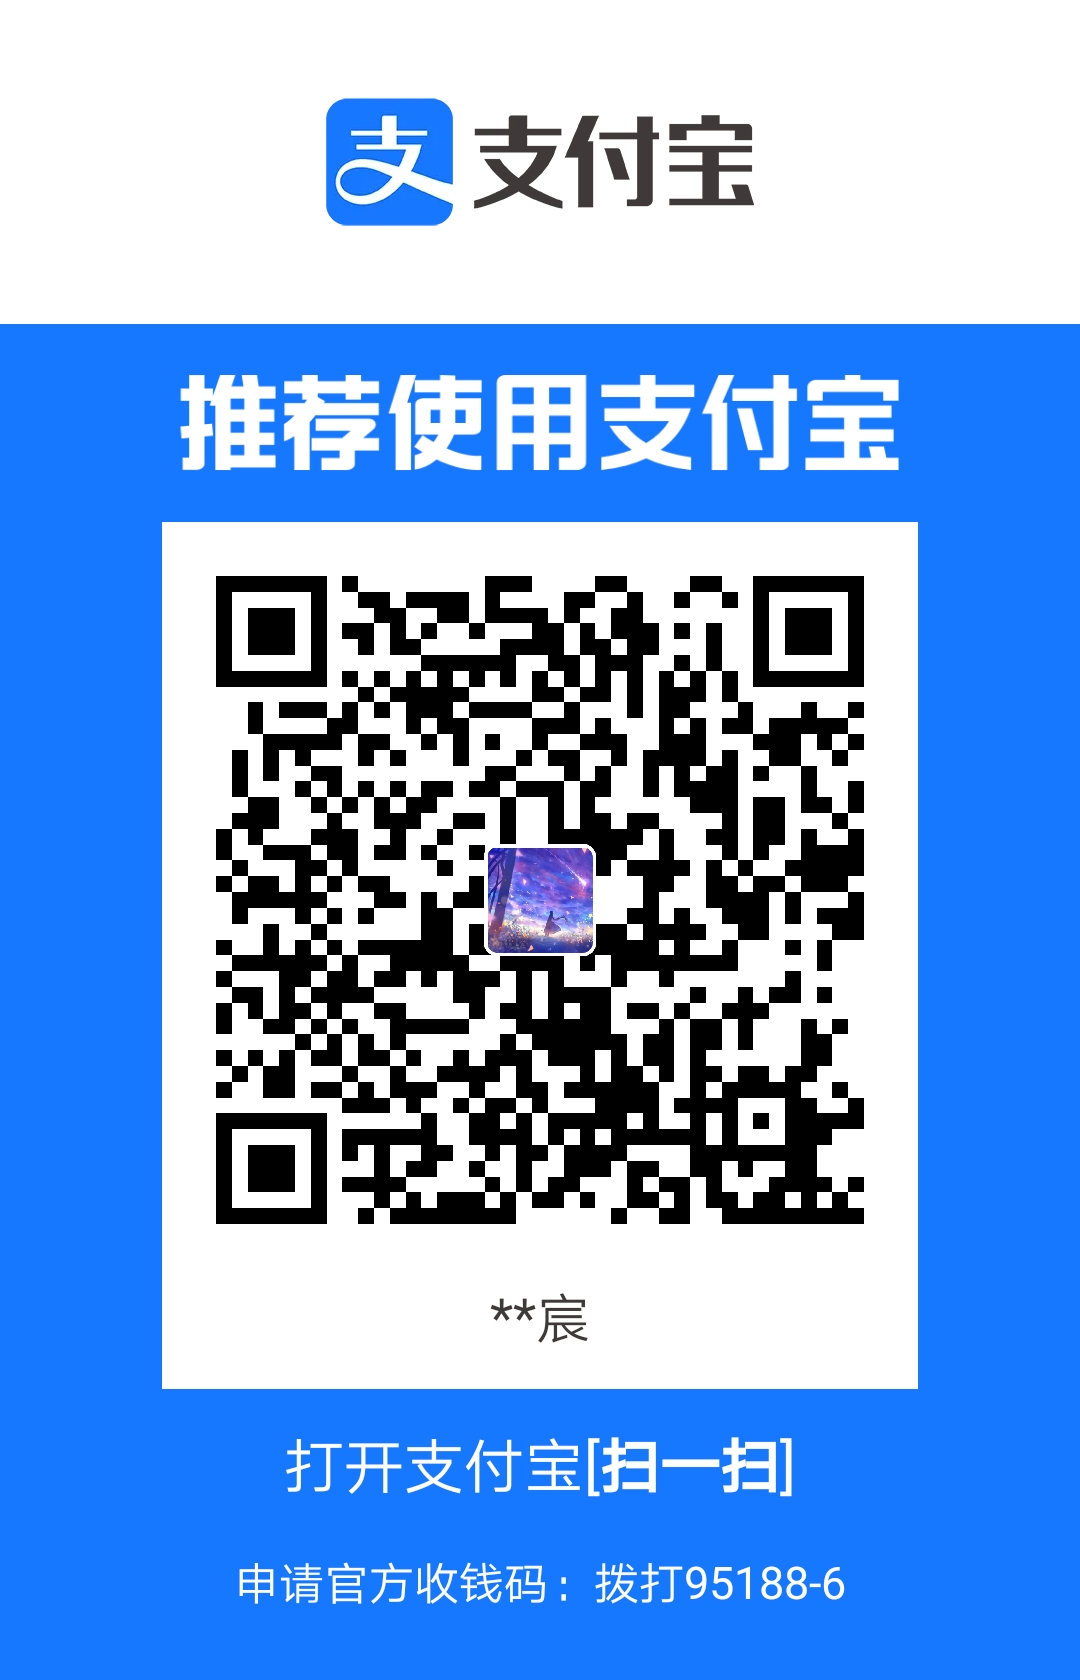 Donate by Alipay